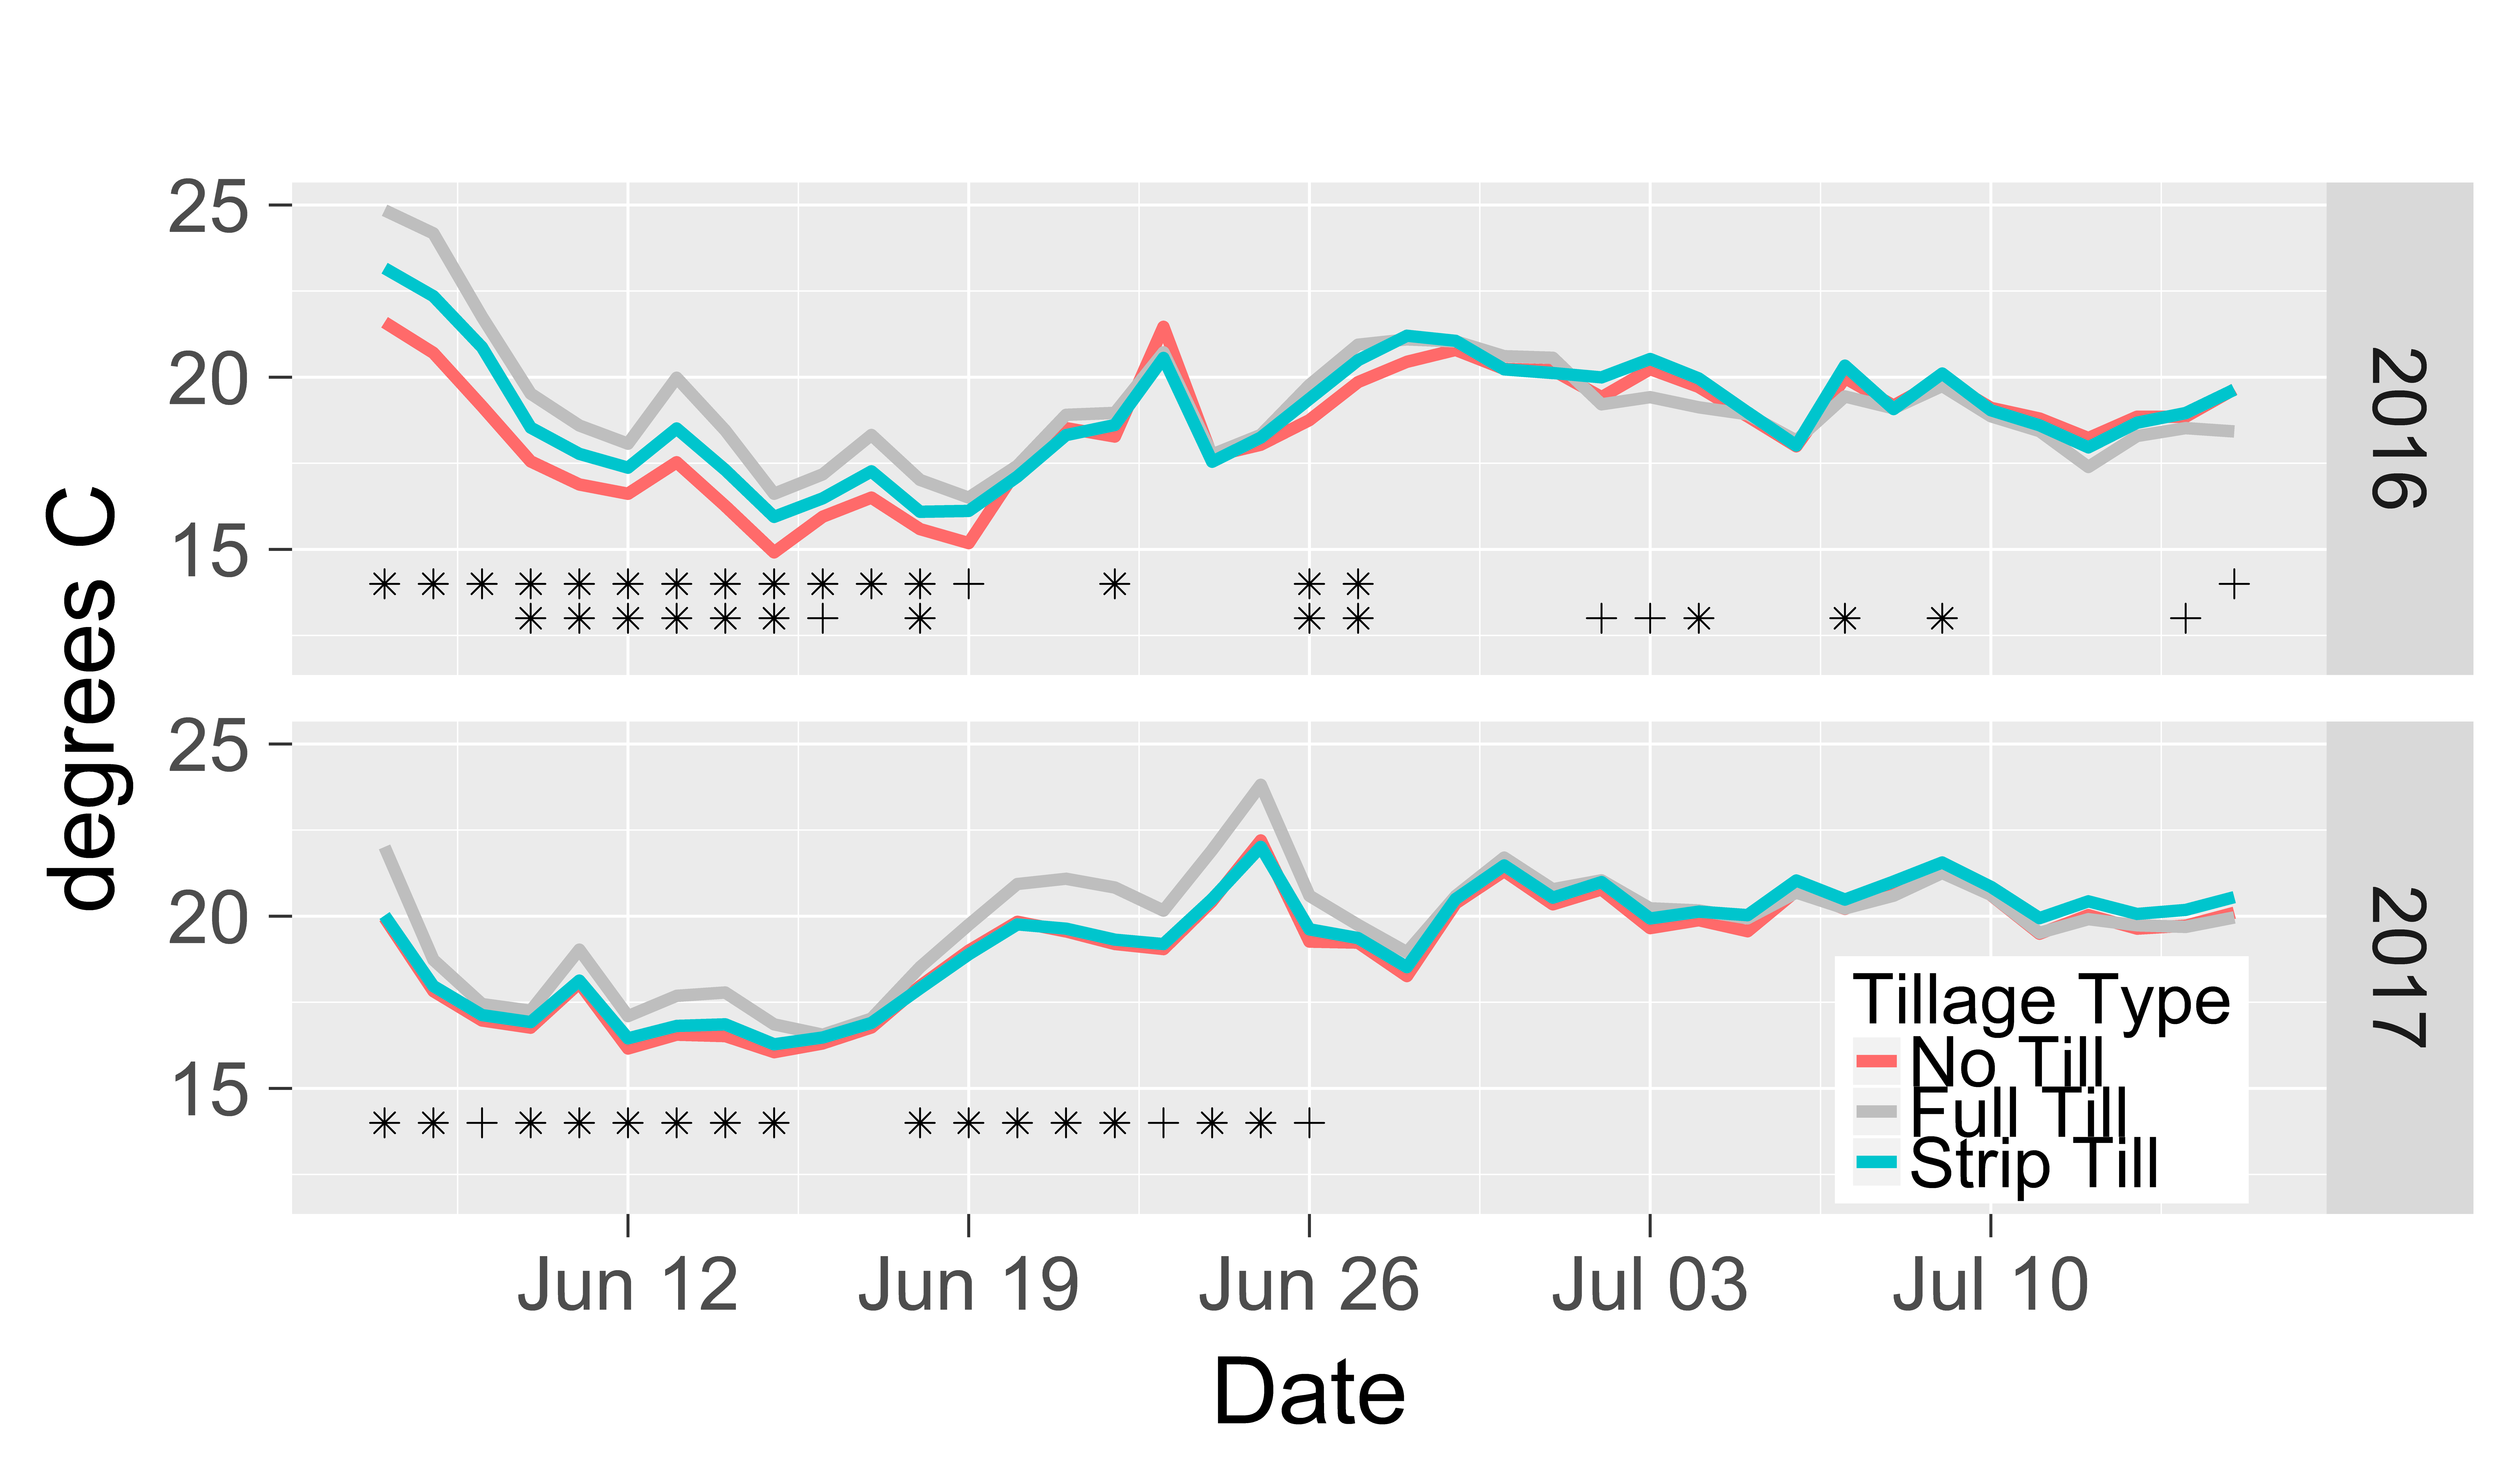 Soil temperature at 10cm in Full Till, No Till, and Strip Till in 2016 and 2017 in squash. Statistical significance was evaluated each day for the mean daily temperature with contrasts between reduced till treatments and full till (top line) and between Strip Till and No Till (bottom line). * indicates p